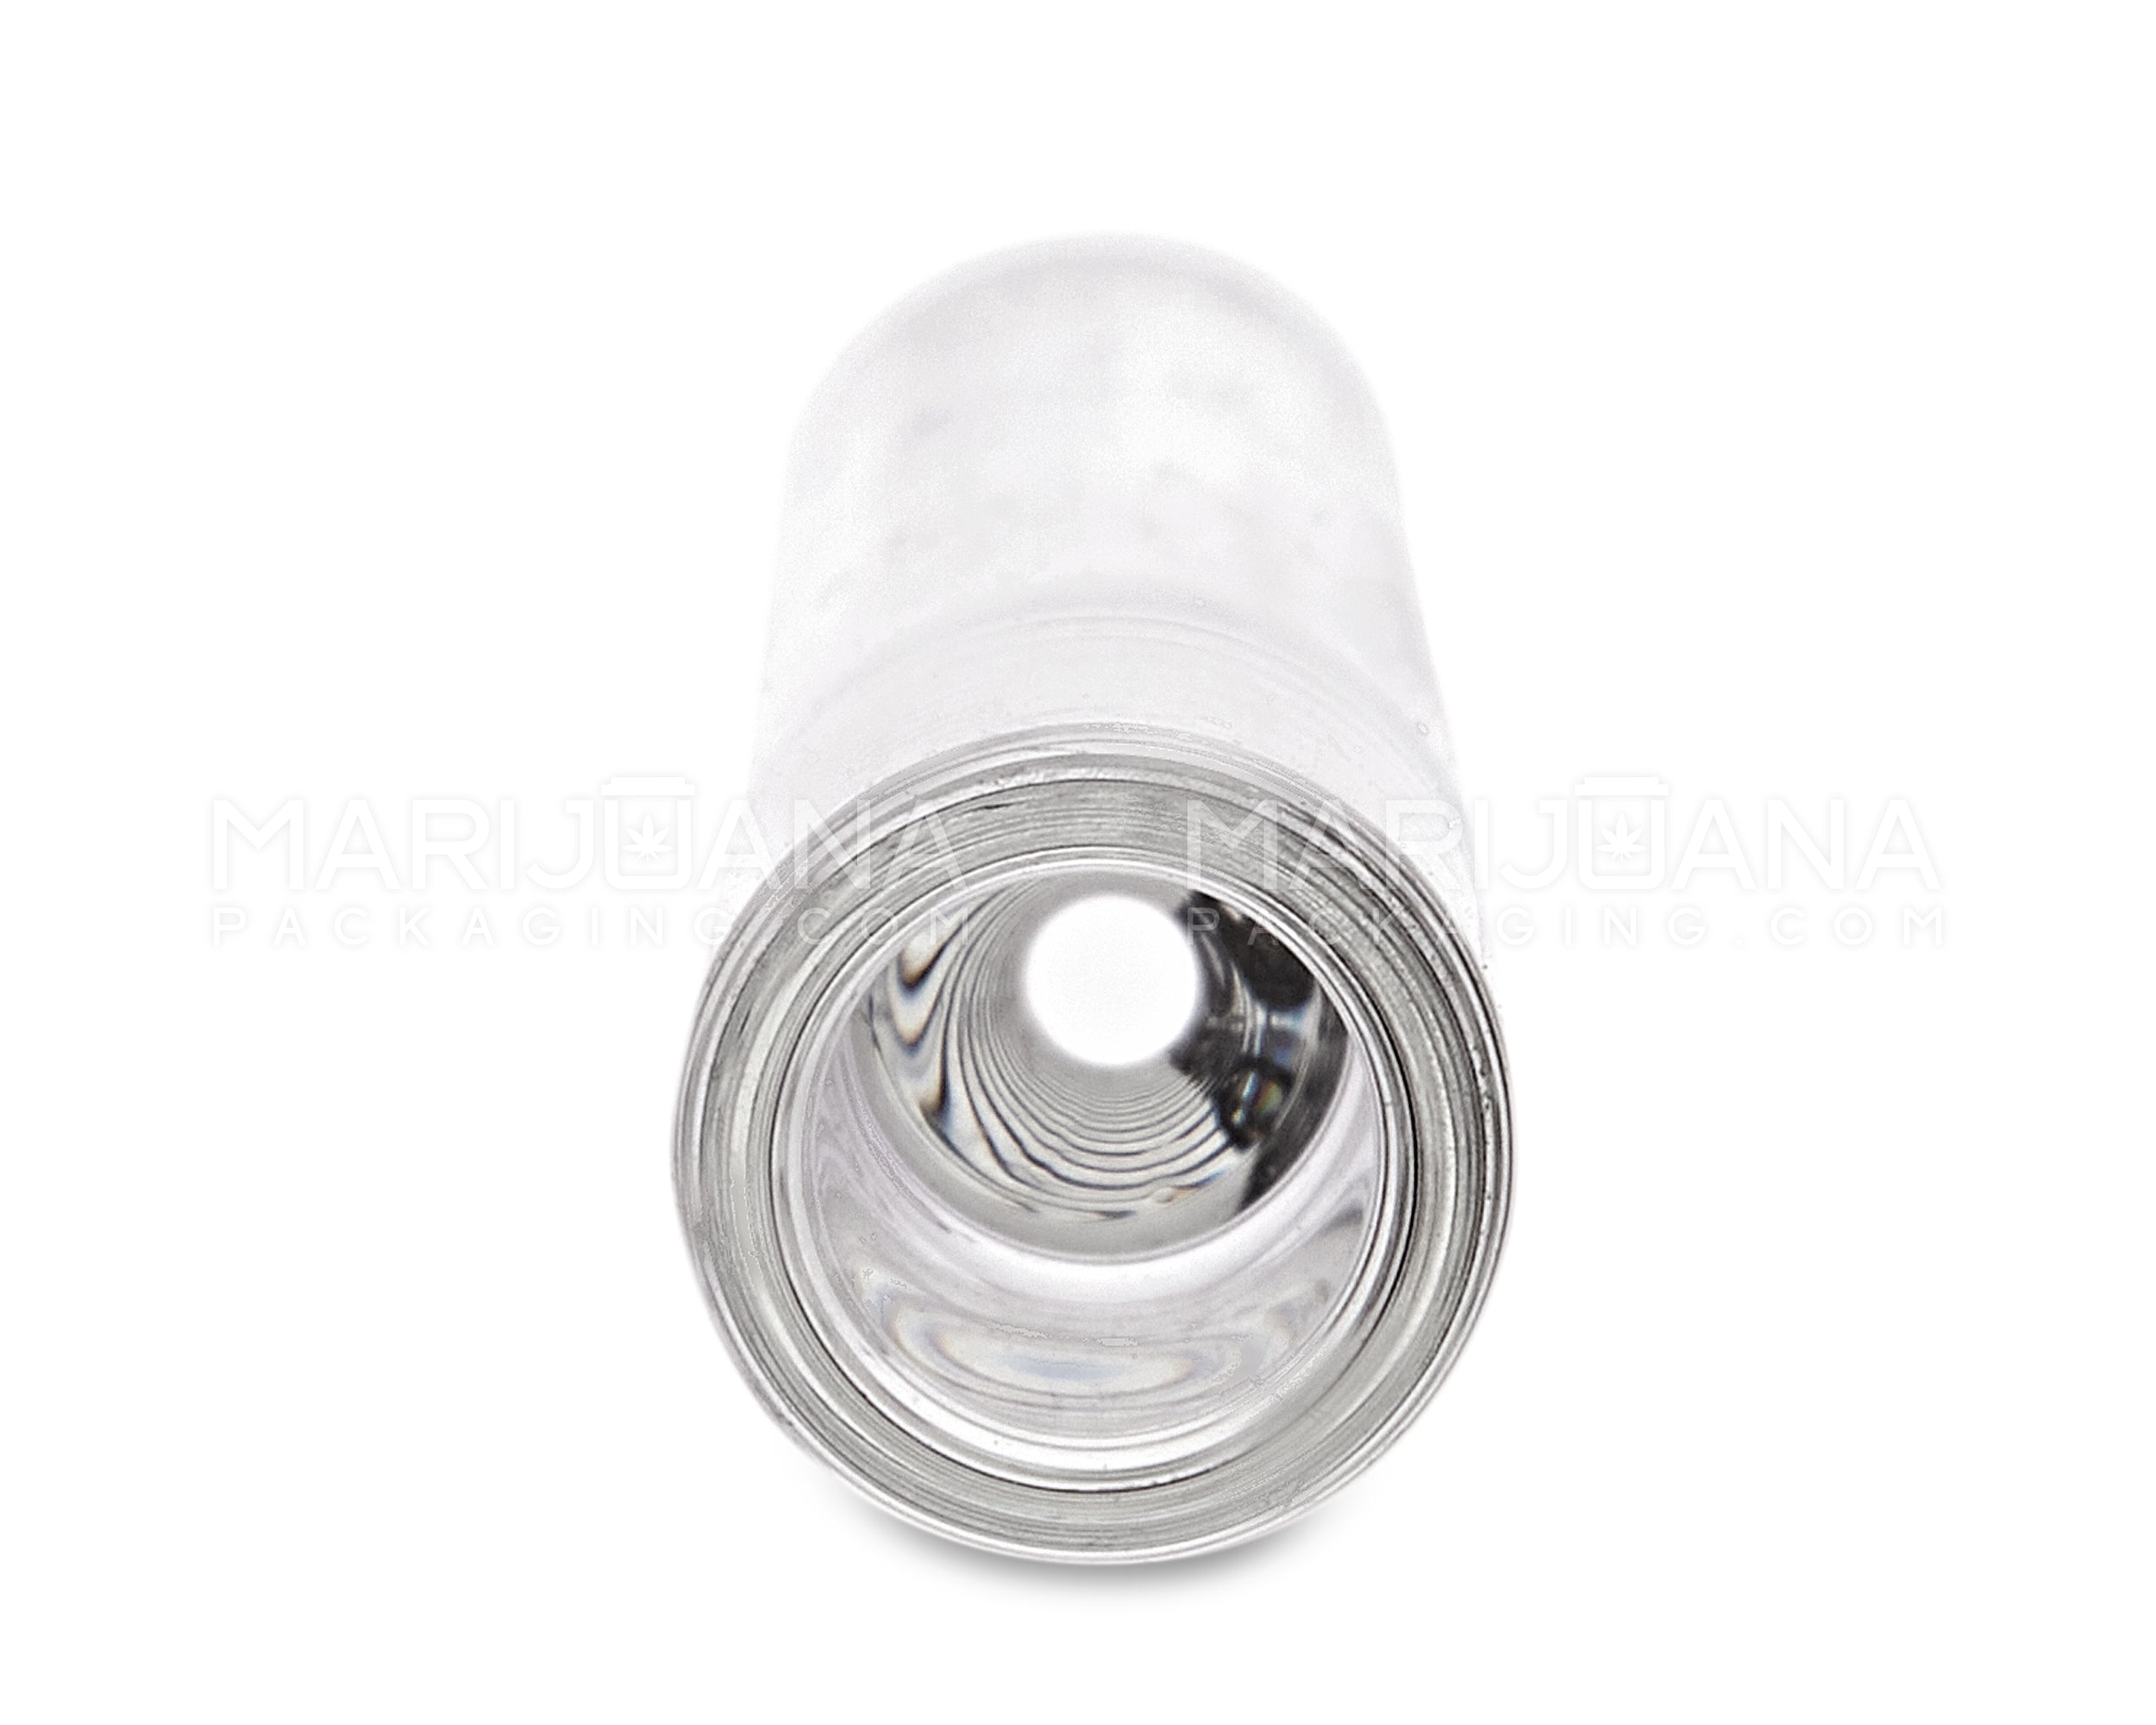 Retail Display | USA Glass OG Chillum Hand Pipes | 4in Long - Glass - 100 Count - 4